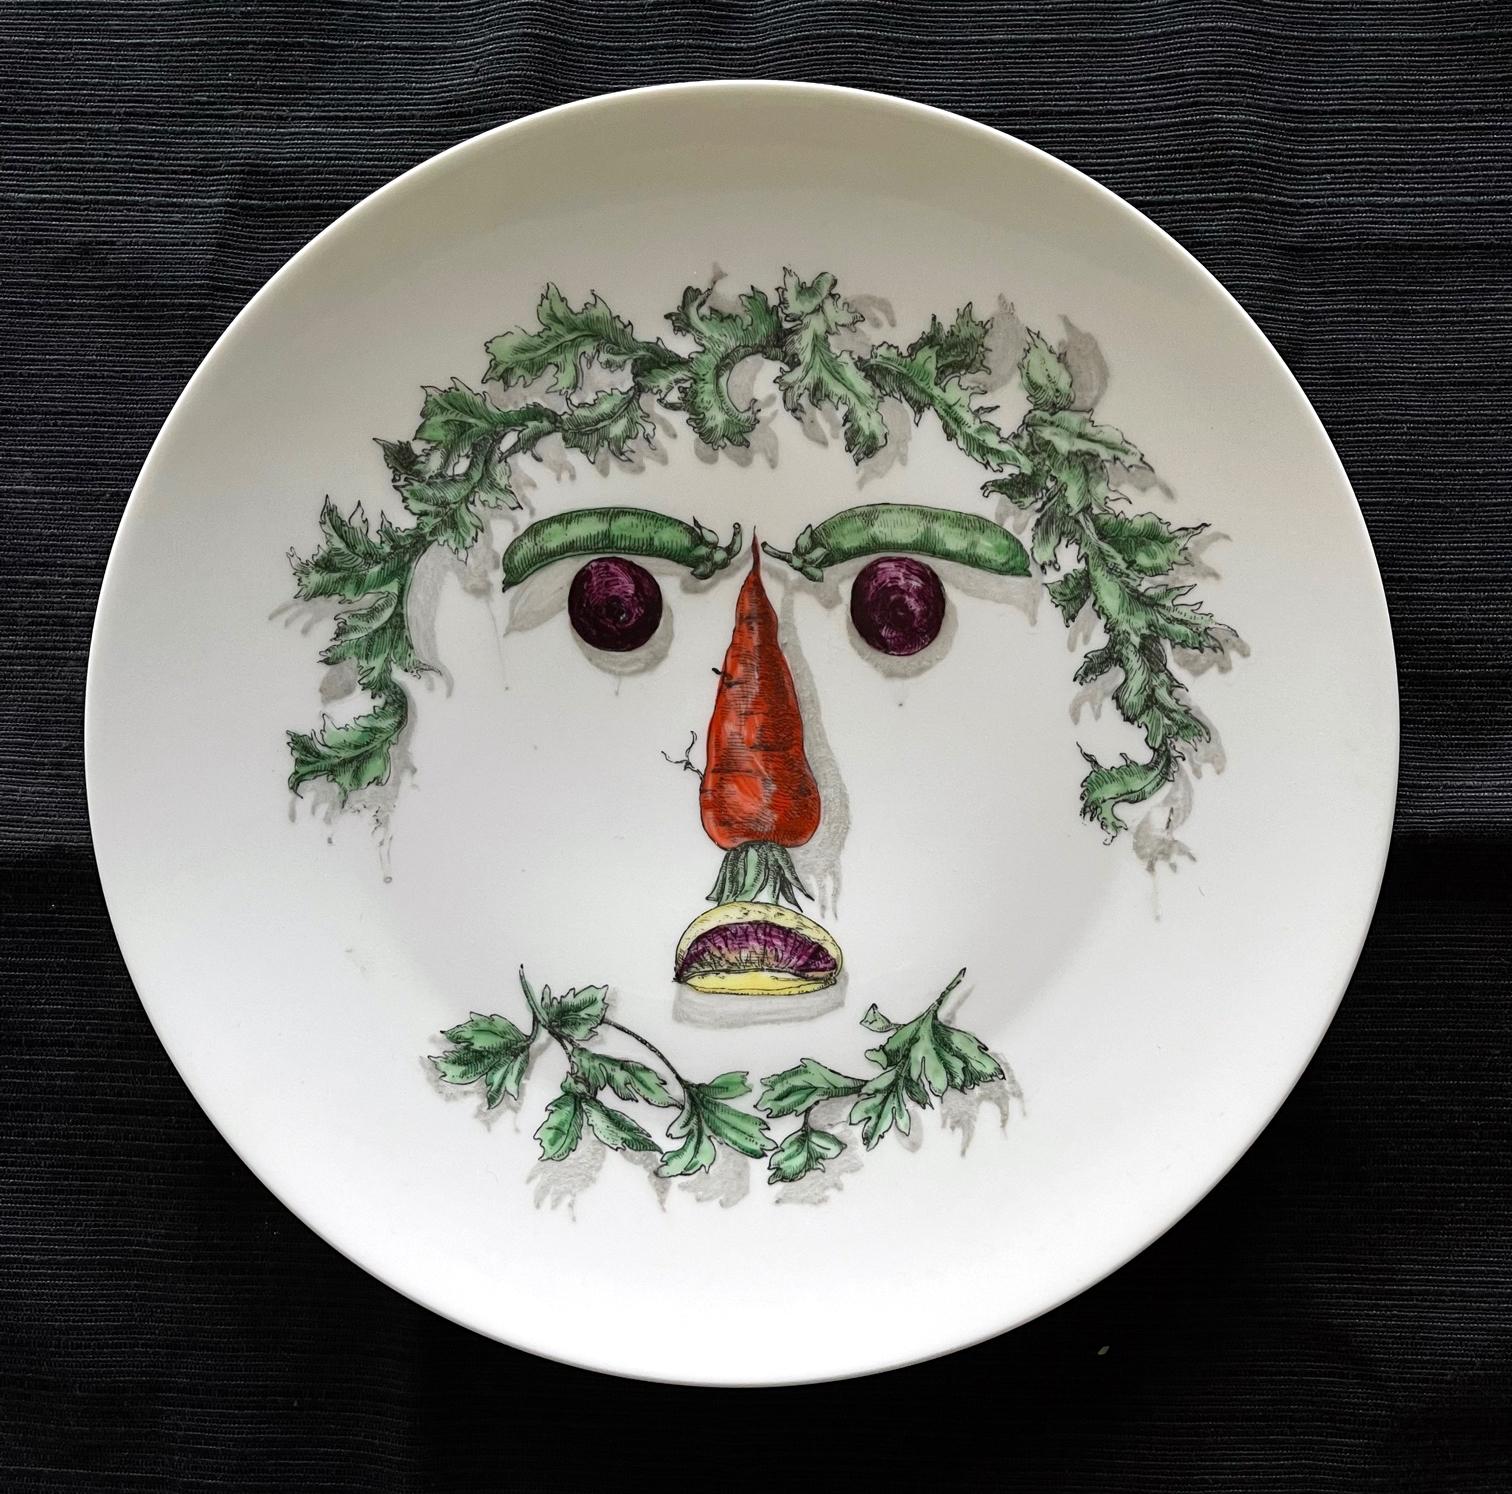 Fornasetti Porcelain Plate with face made with arranged vegetables. Stamped 